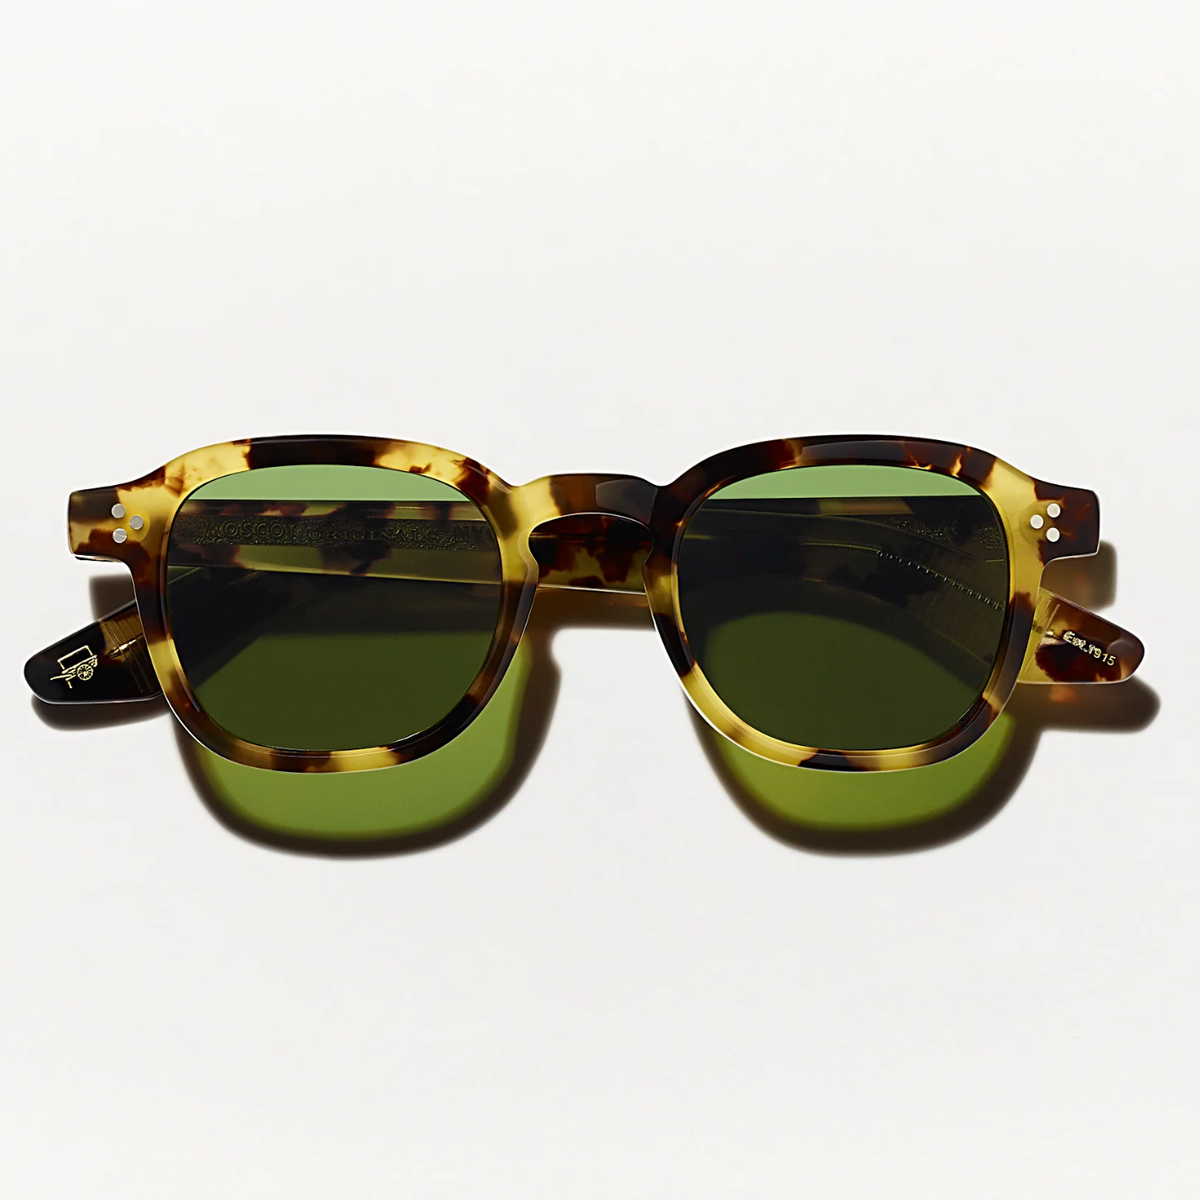 MOSCOT MONZA size 49